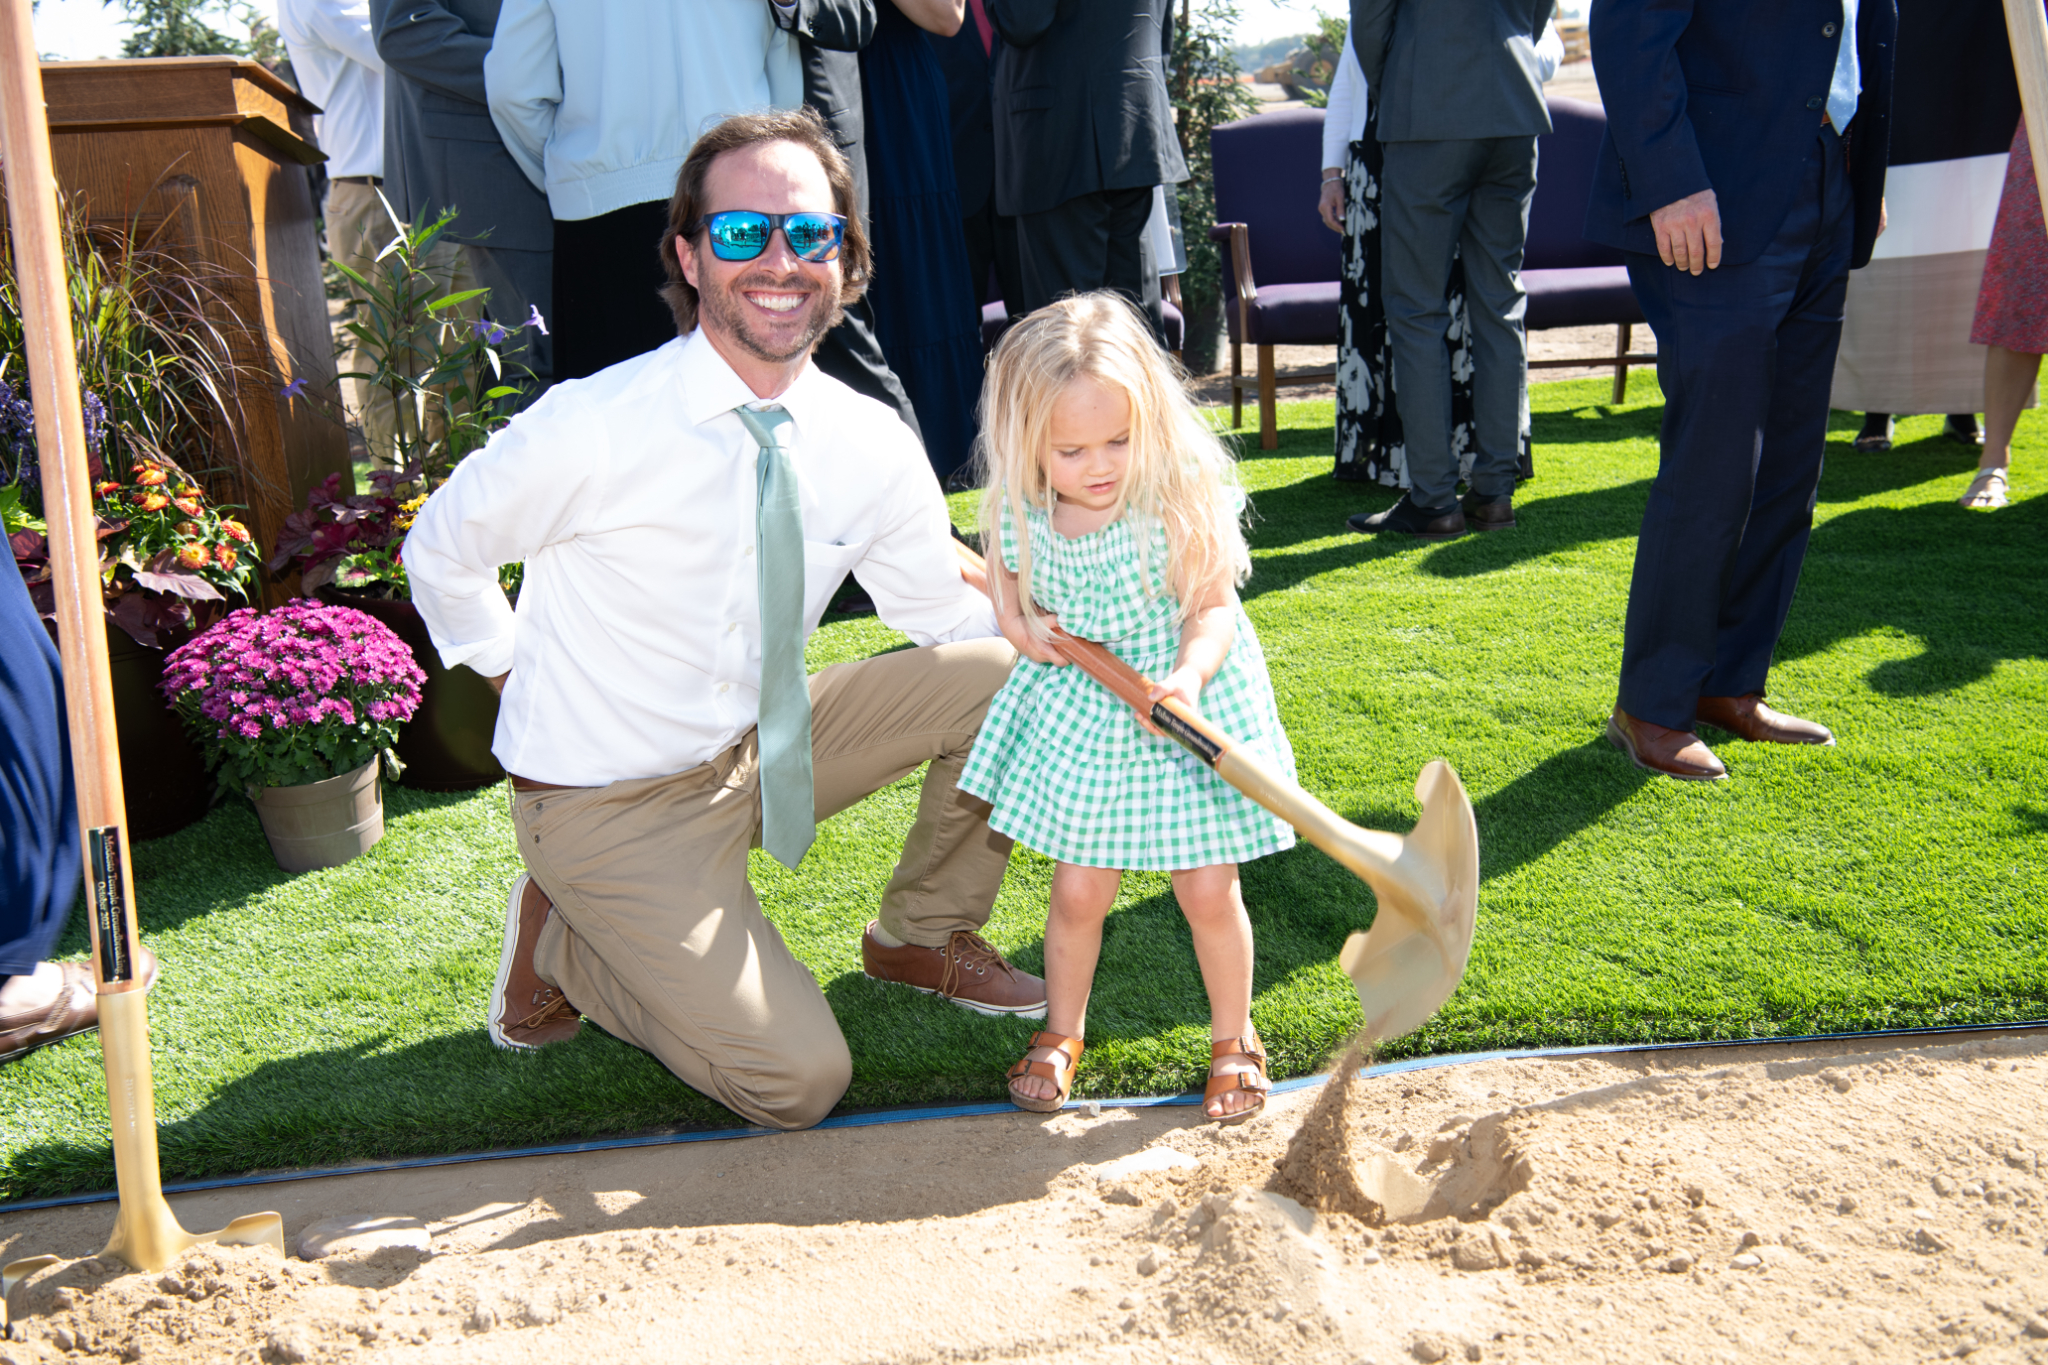 A dad kneeling next to his child daughter, with the daughter holding a shovelful of dirt.